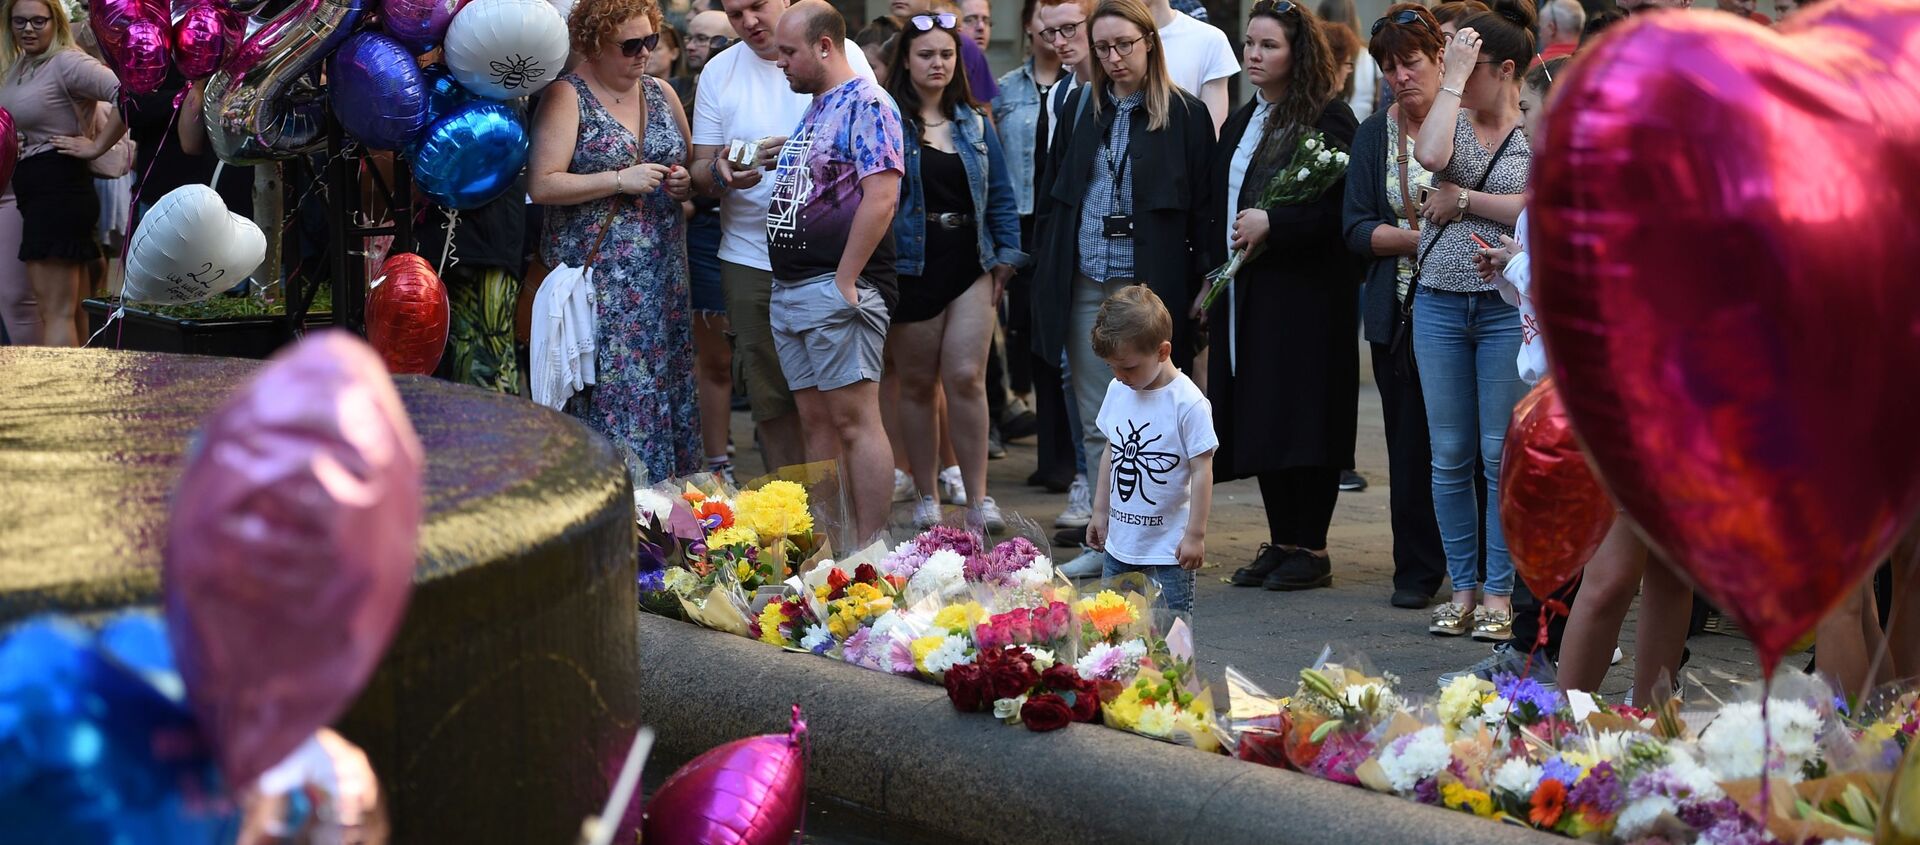 People pay their respects as they look at flowers and balloons left in central Manchester on May 22, 2018, the one year anniversary of the deadly attack at Manchester Arena.  - Sputnik International, 1920, 07.12.2020